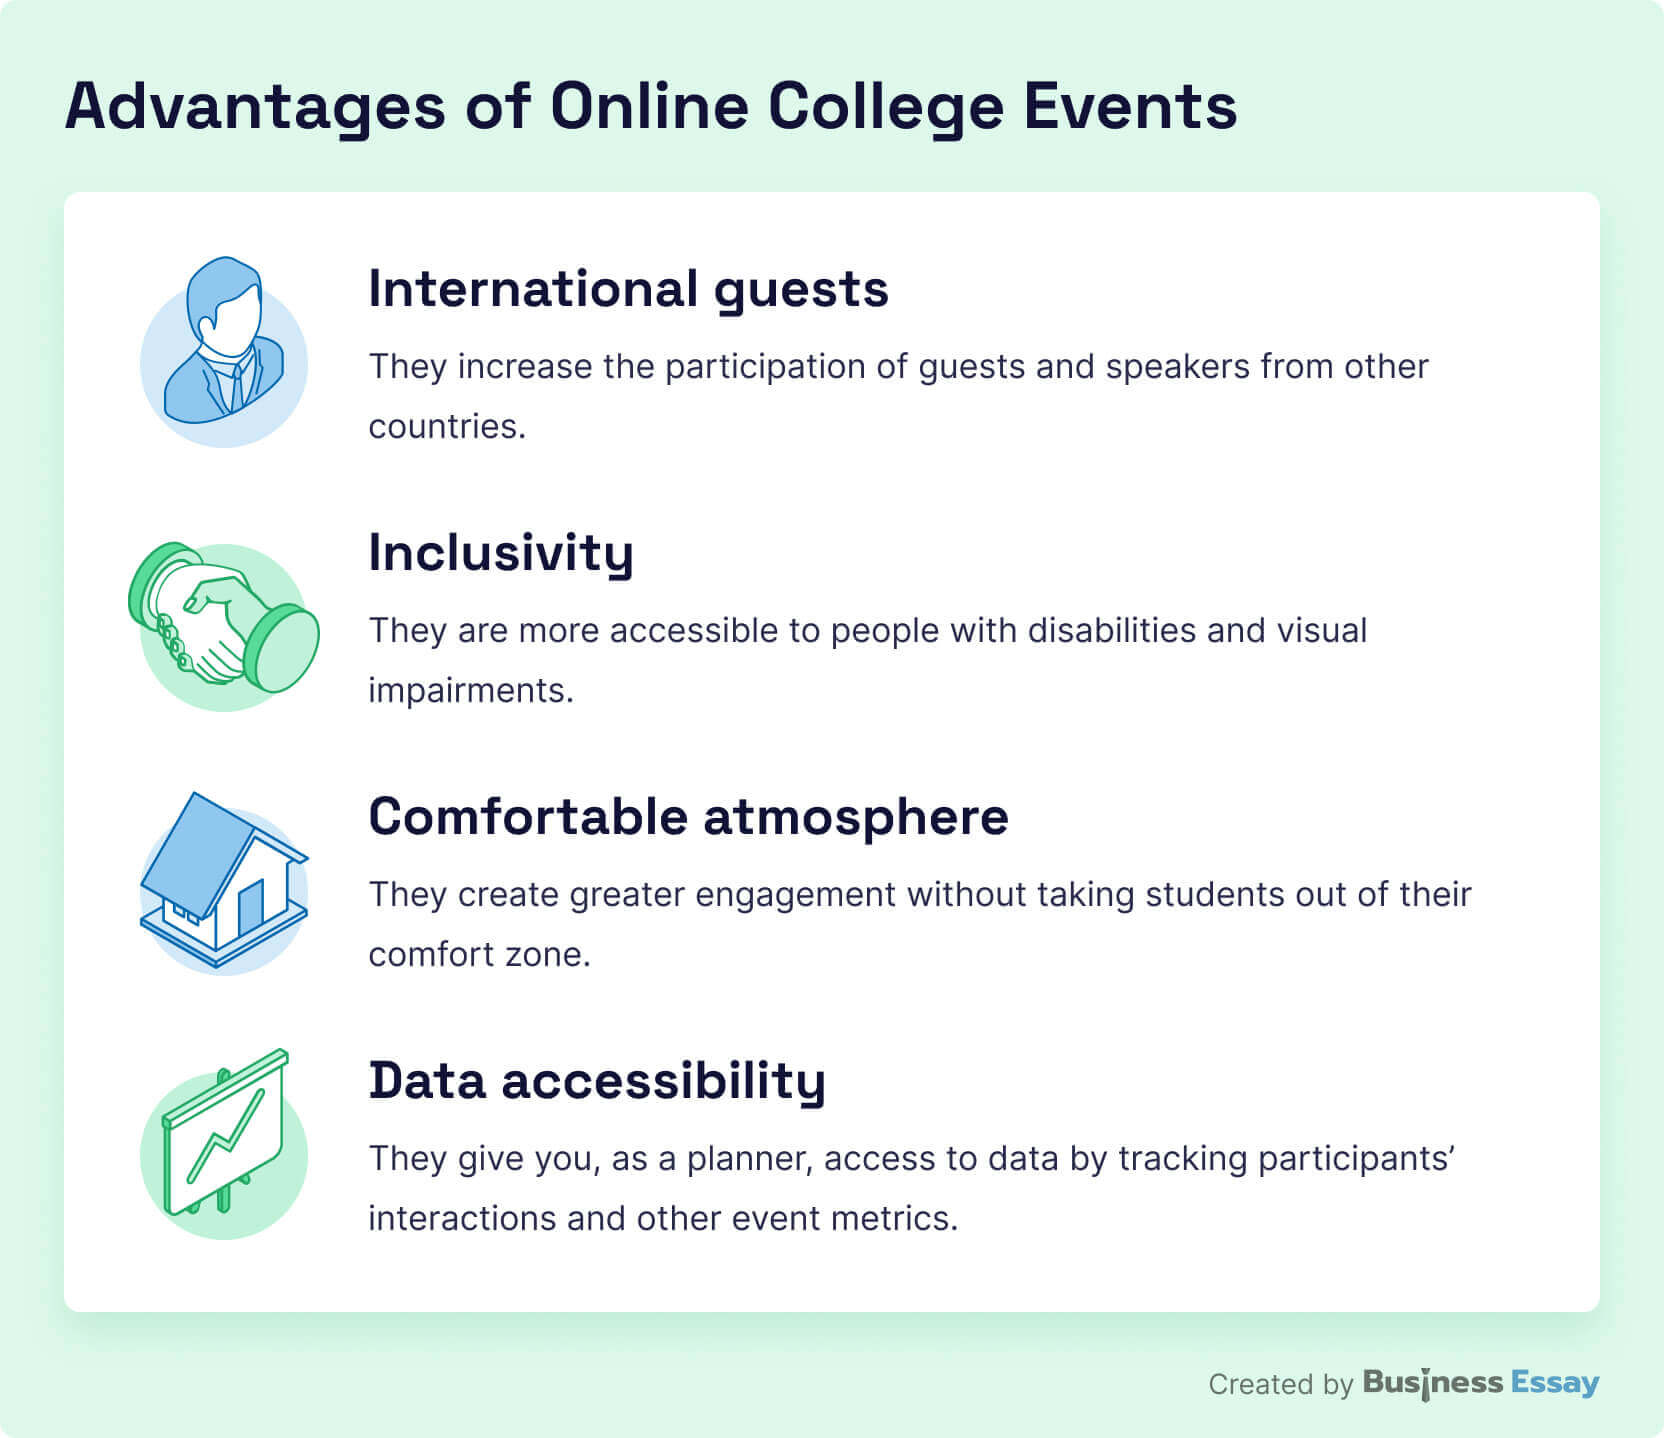 The picture provides the main advantages of online college events.